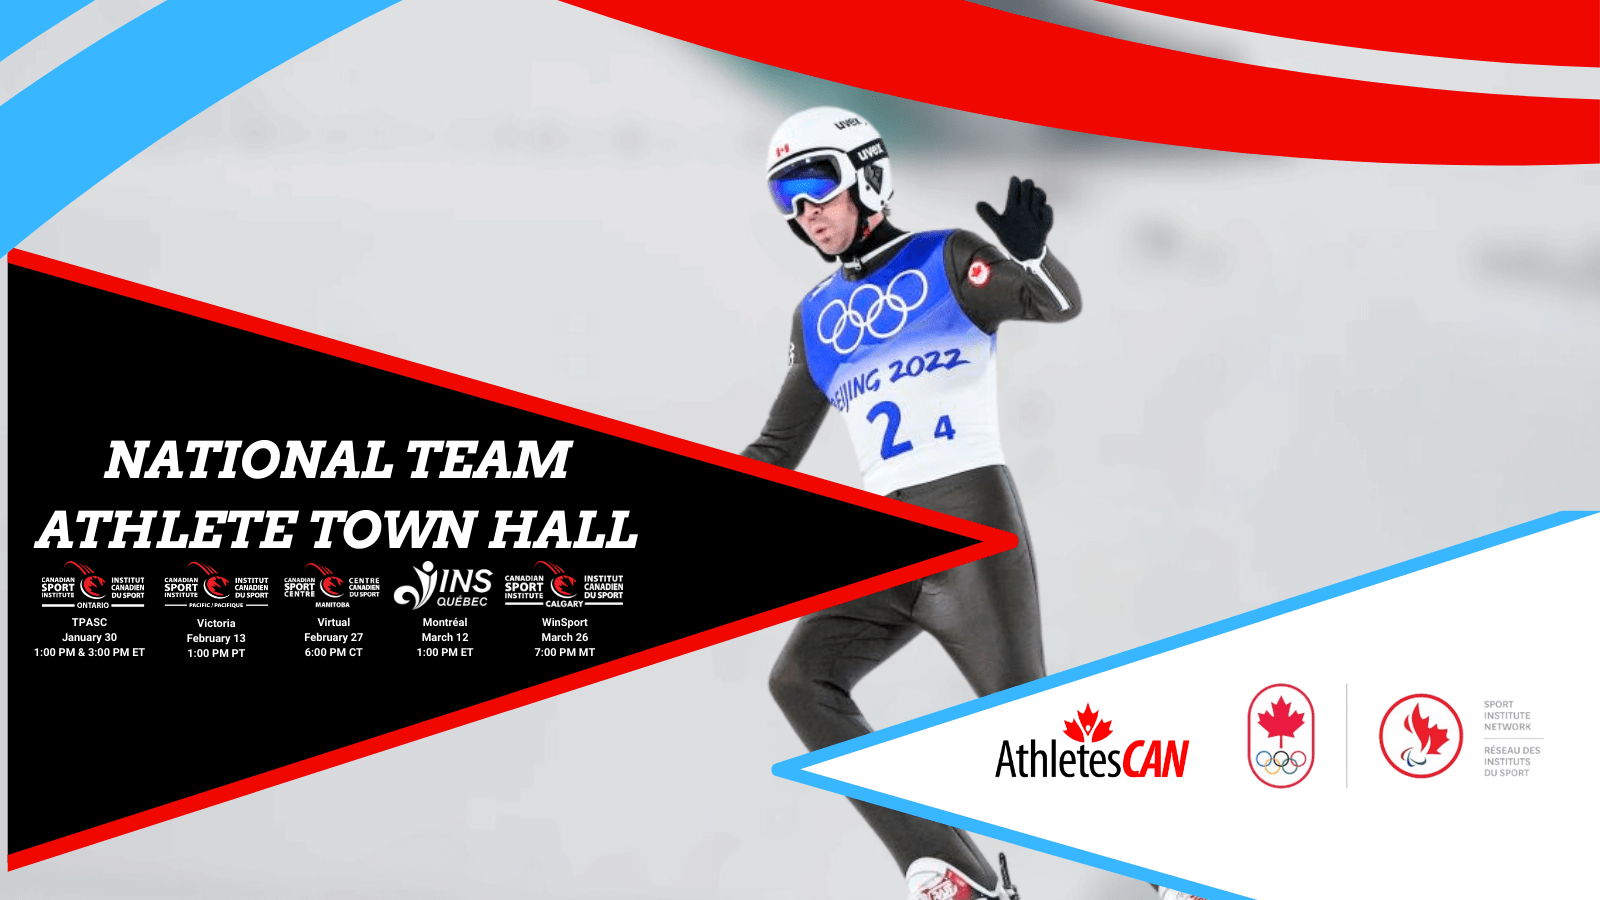 AthletesCAN to host National Team Athlete Town Halls in collaboration with Canadian Olympic and Paralympic Sport Institute Network